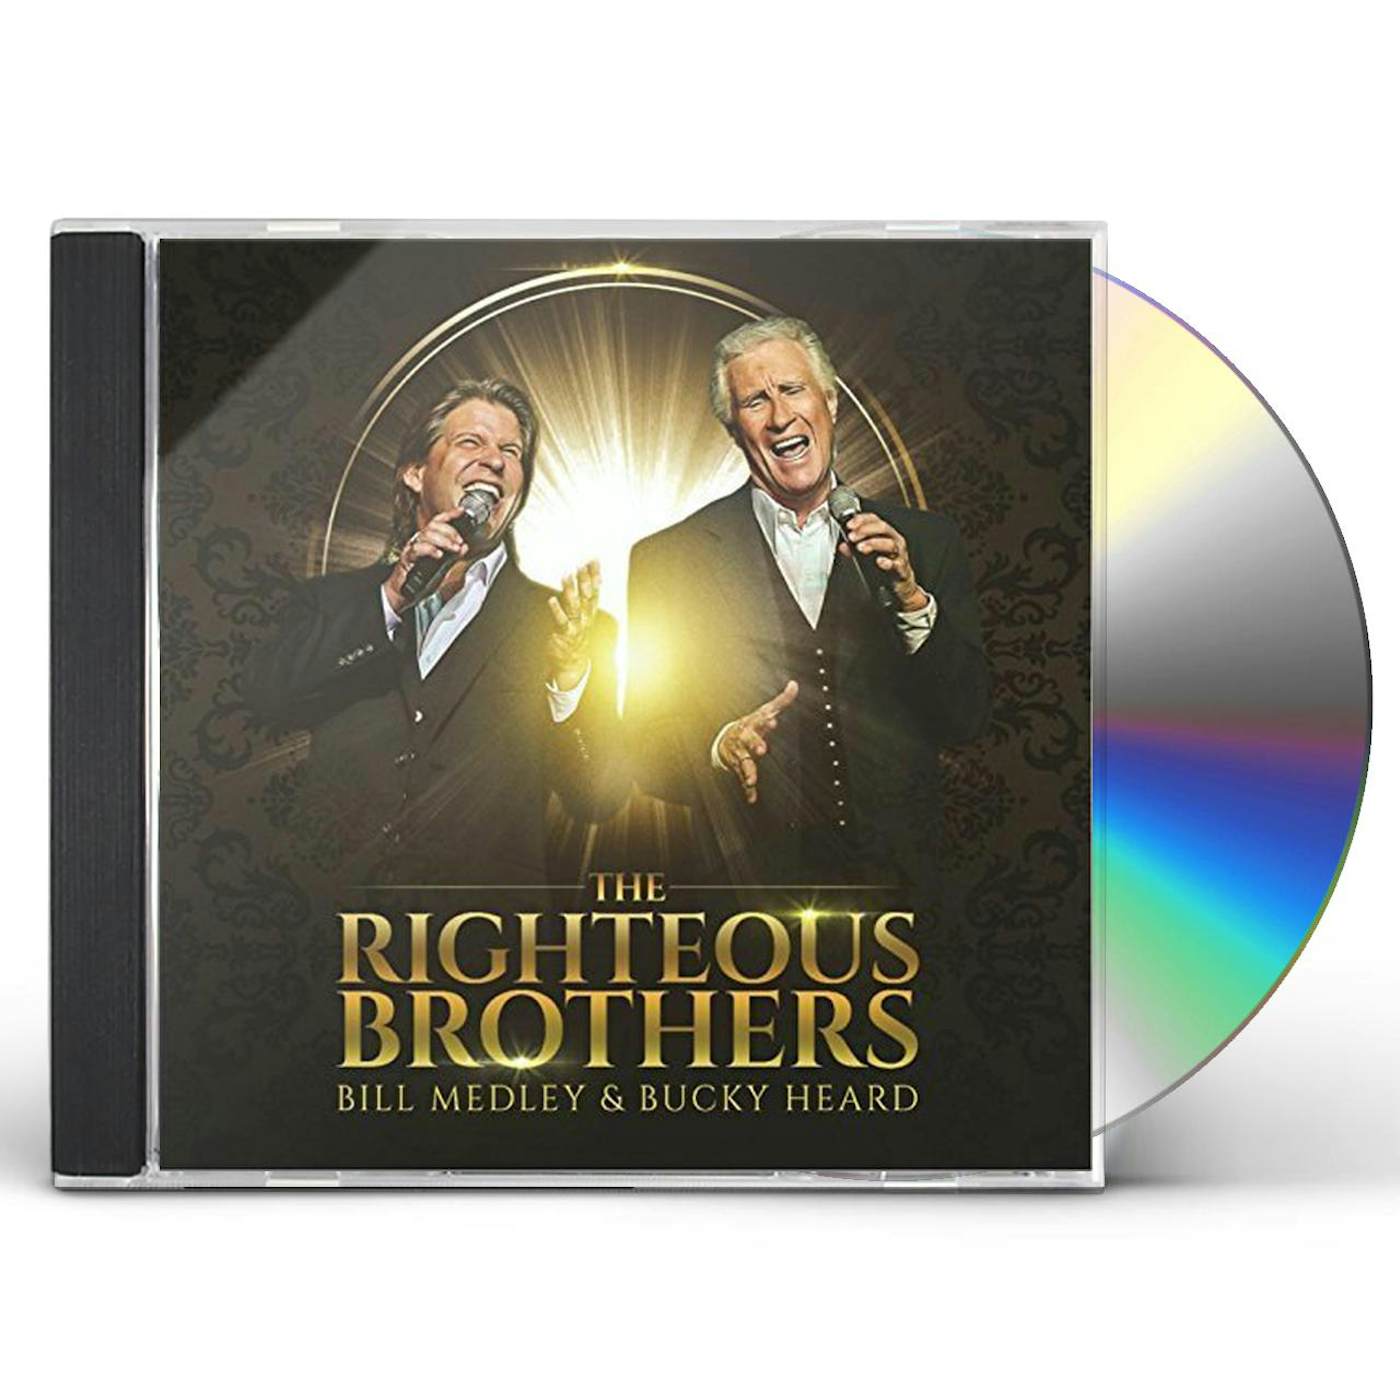 The Righteous Brothers CD